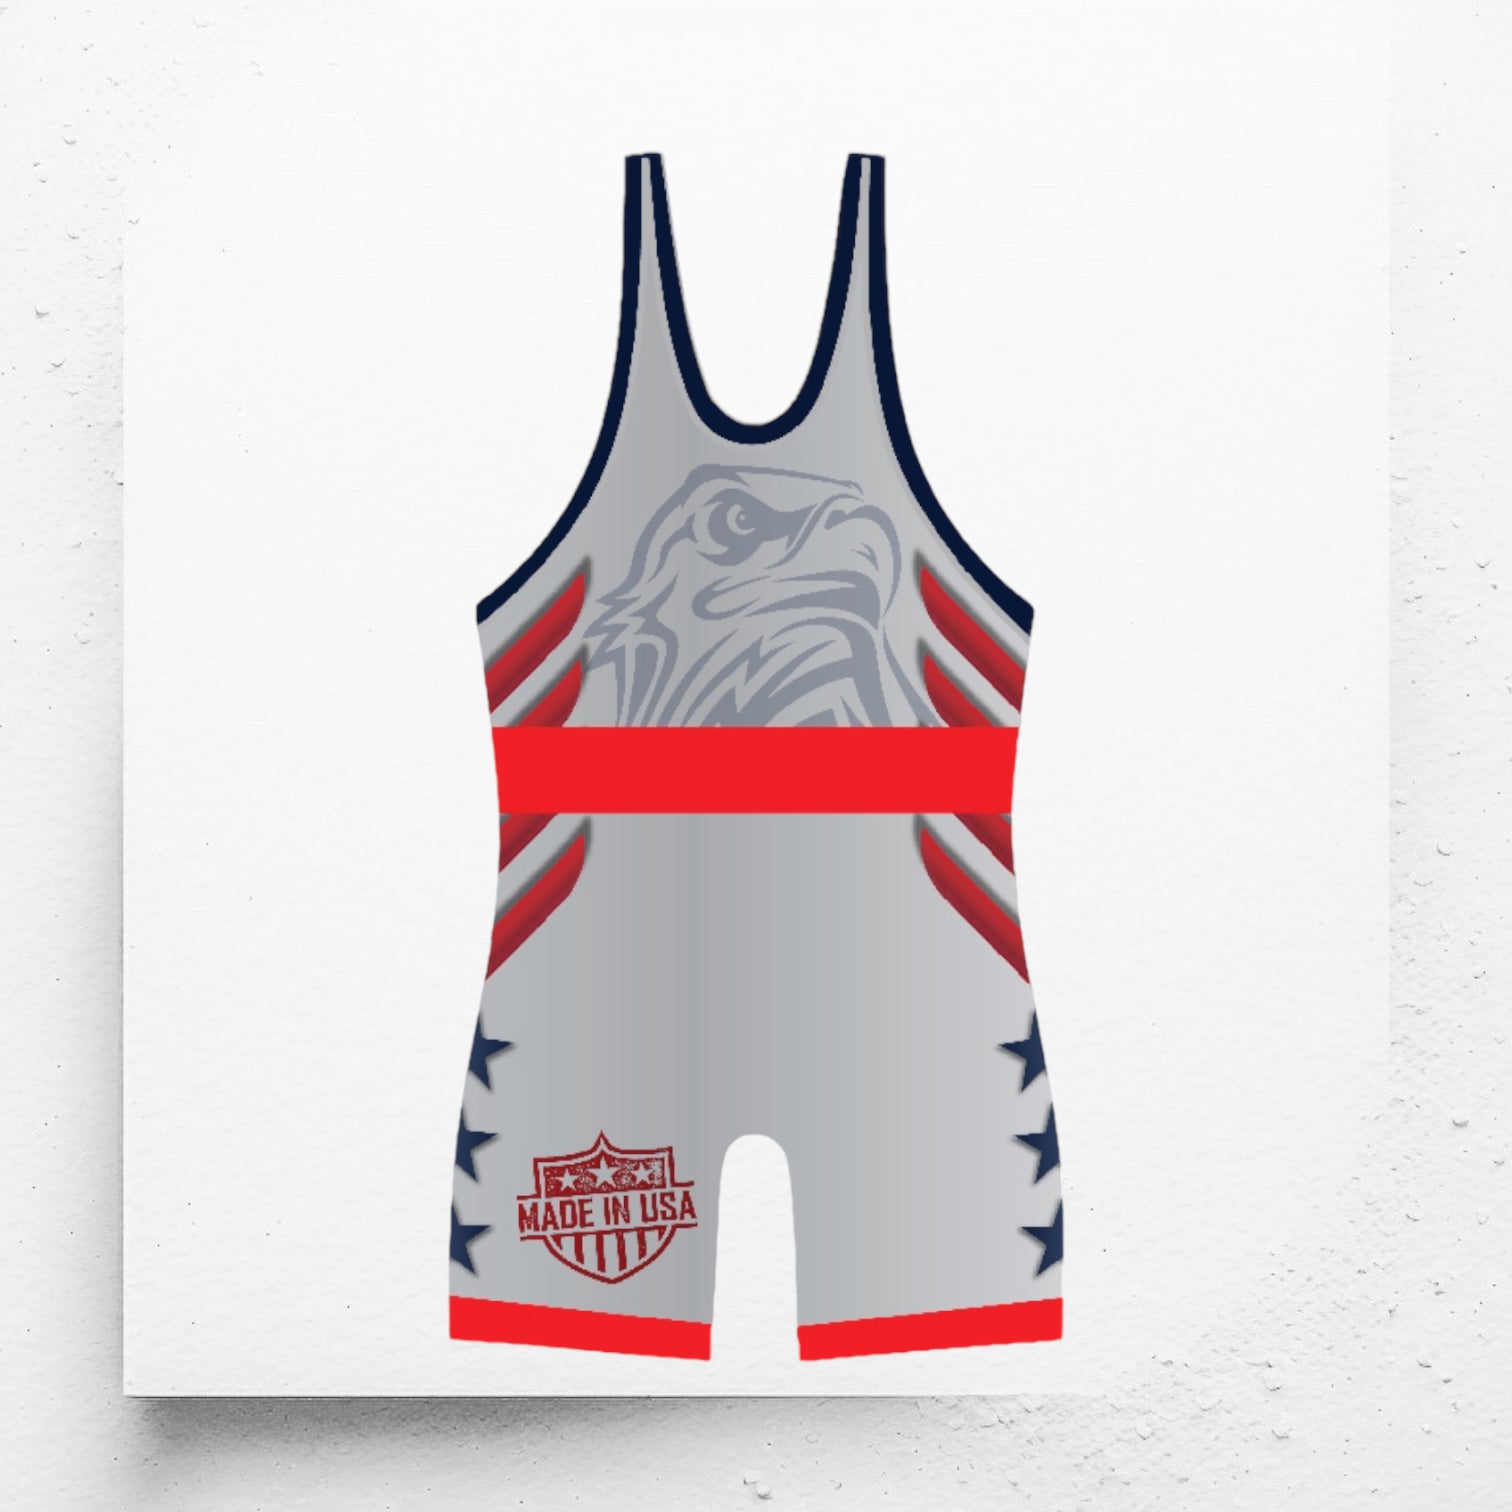 USA Iron Eagle Wrestling Singlet Red – 3x Gear